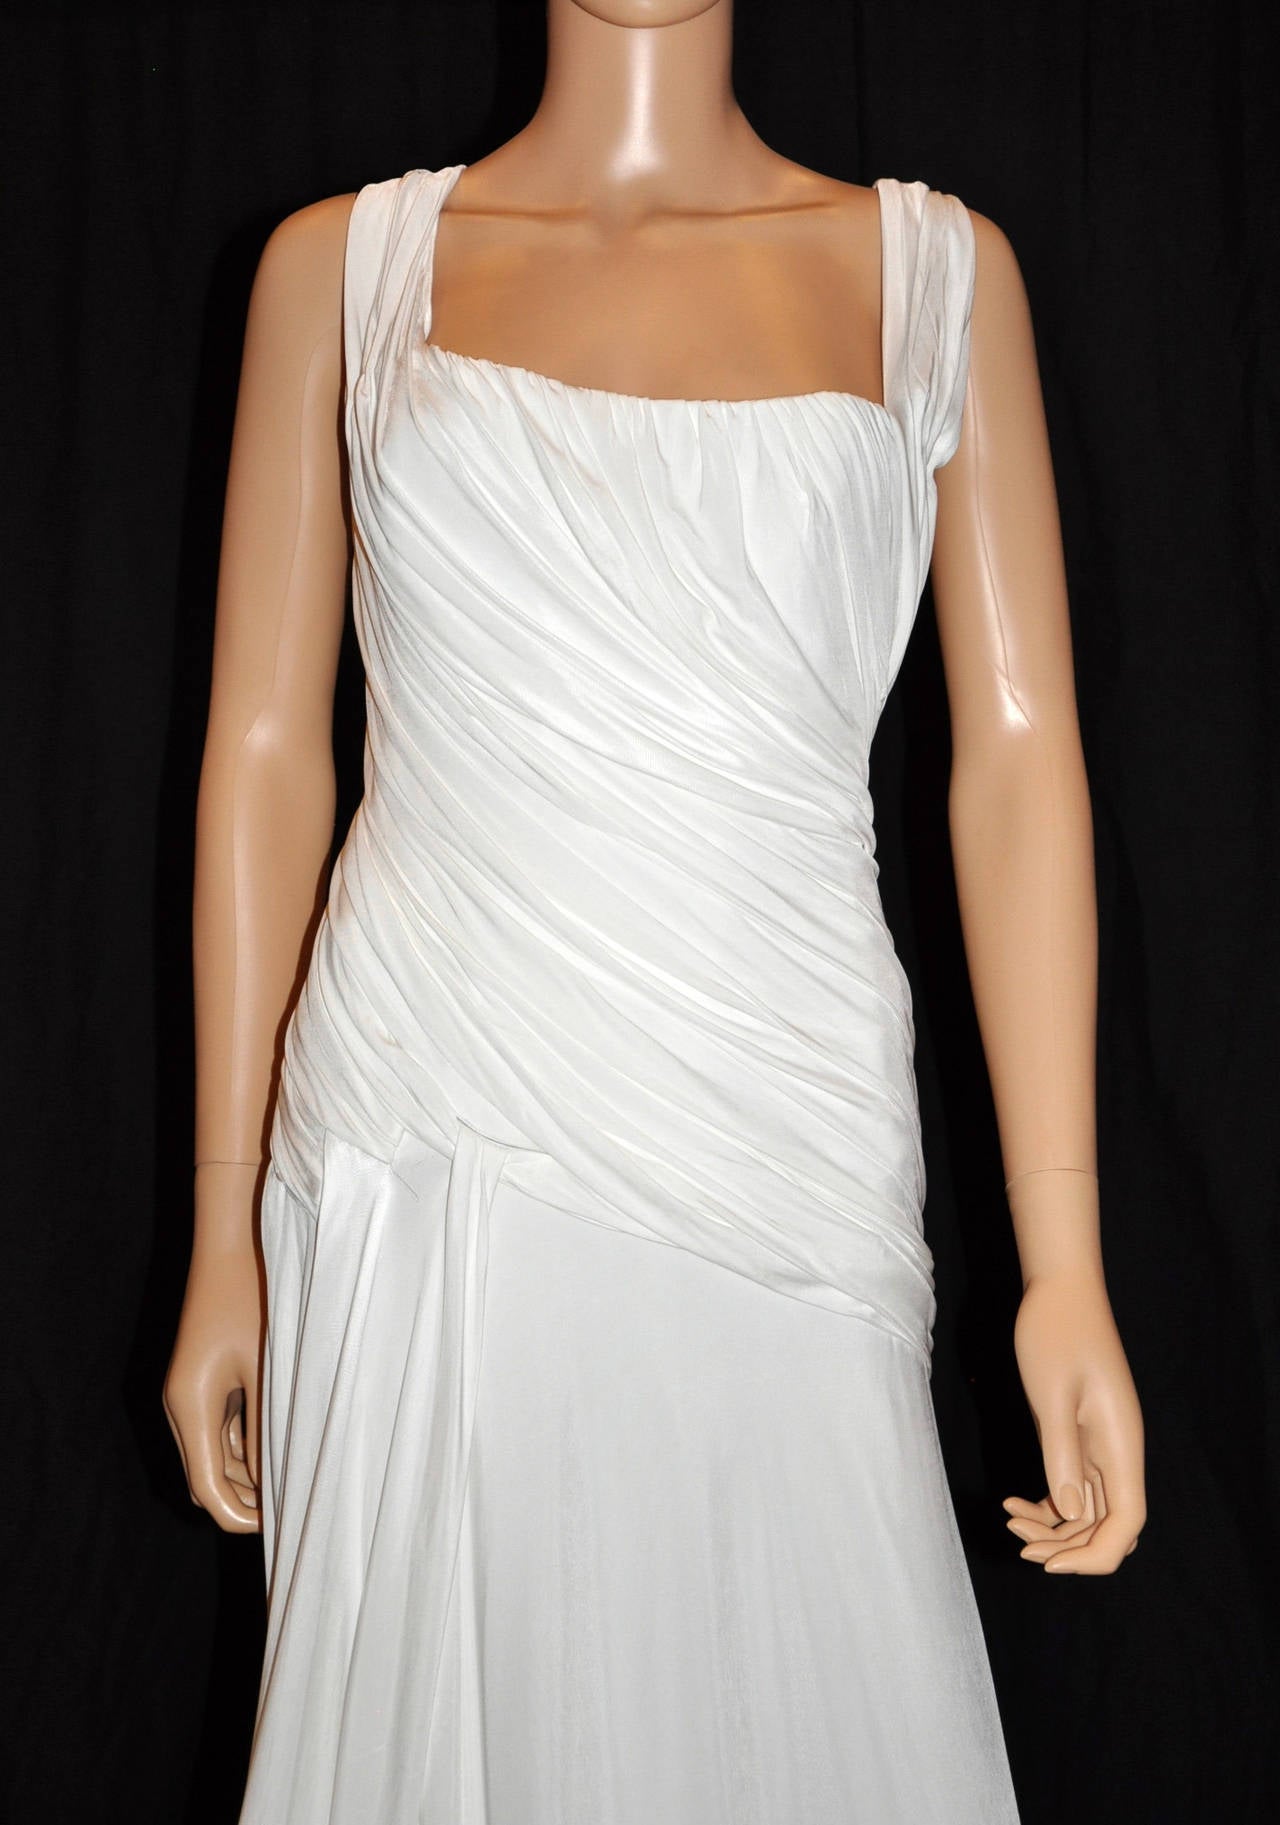 Versace 

White gown with ruffles
Elegant cut
Suitable for a wedding ceremony

Content: silk

Size IT 40 - US 4/6

Brand new, with tags!

 100% authentic guarantee 

       PLEASE VISIT OUR STORE FOR MORE GREAT ITEMS 







